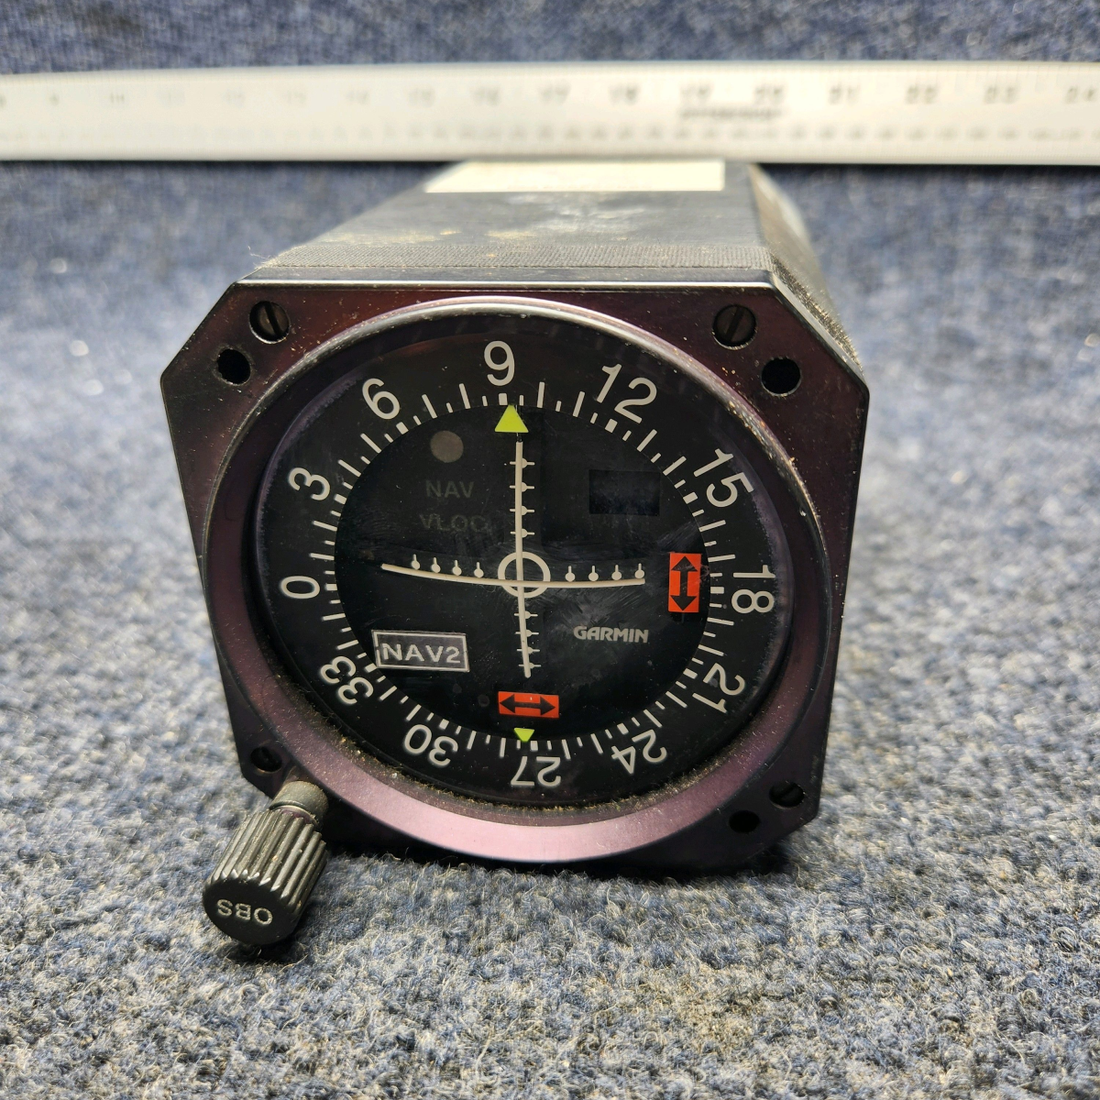 Used aircraft parts for sale, 013-00049-01 PIPIR PA32RT-300 GARMIN GI-106A COURSE DEVIATION INDICATOR (USED) S/N A21155